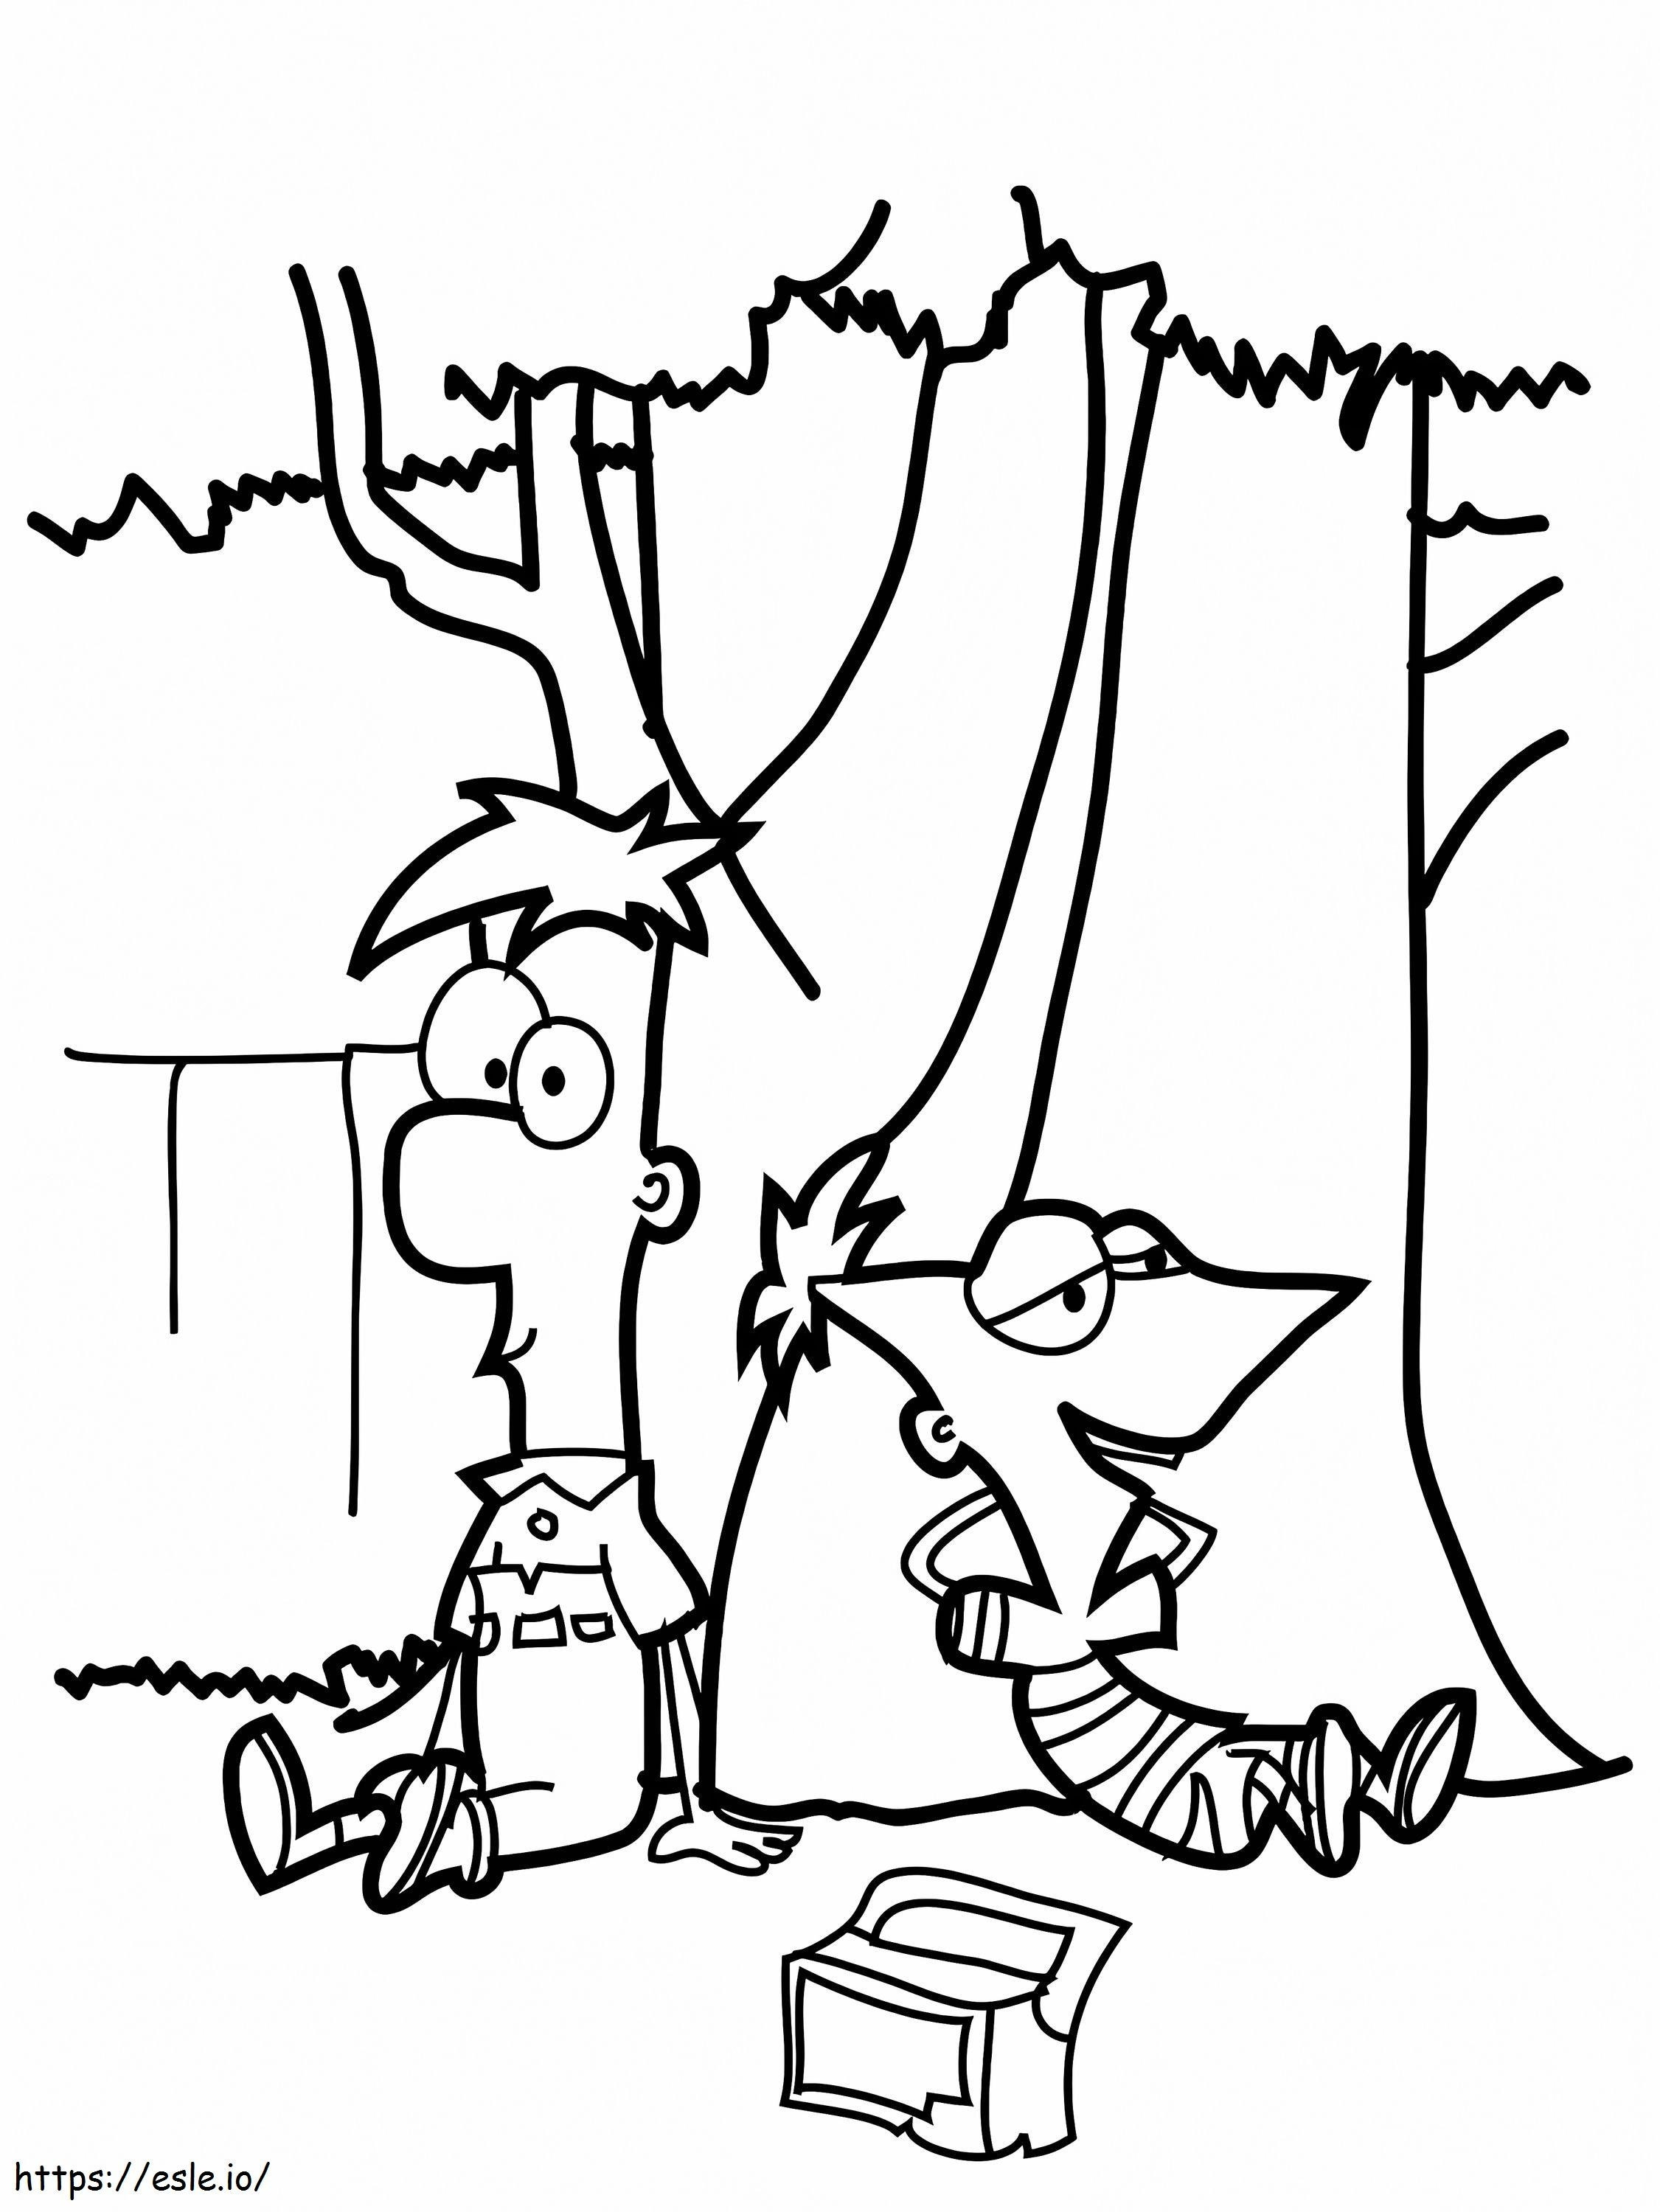 1547777043 Impressive Phineas And Ferb Free Printable For Kids Gallery coloring page